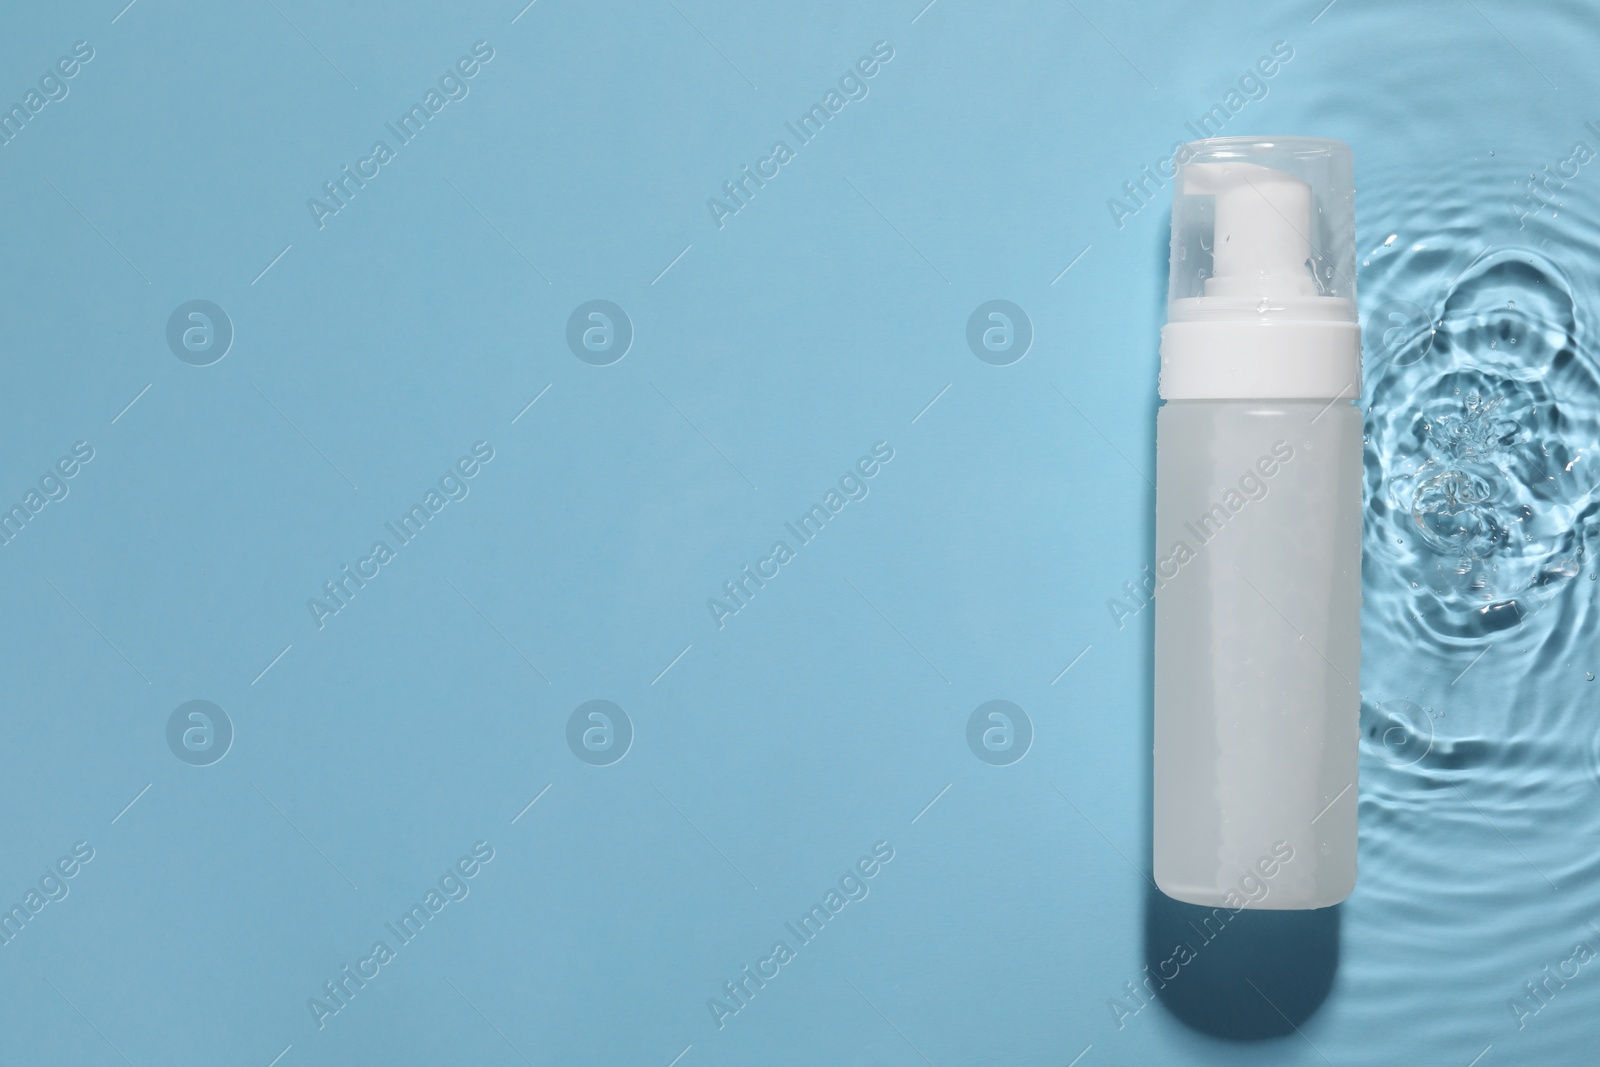 Photo of Bottle of face cleansing product in water against light blue background, top view. Space for text